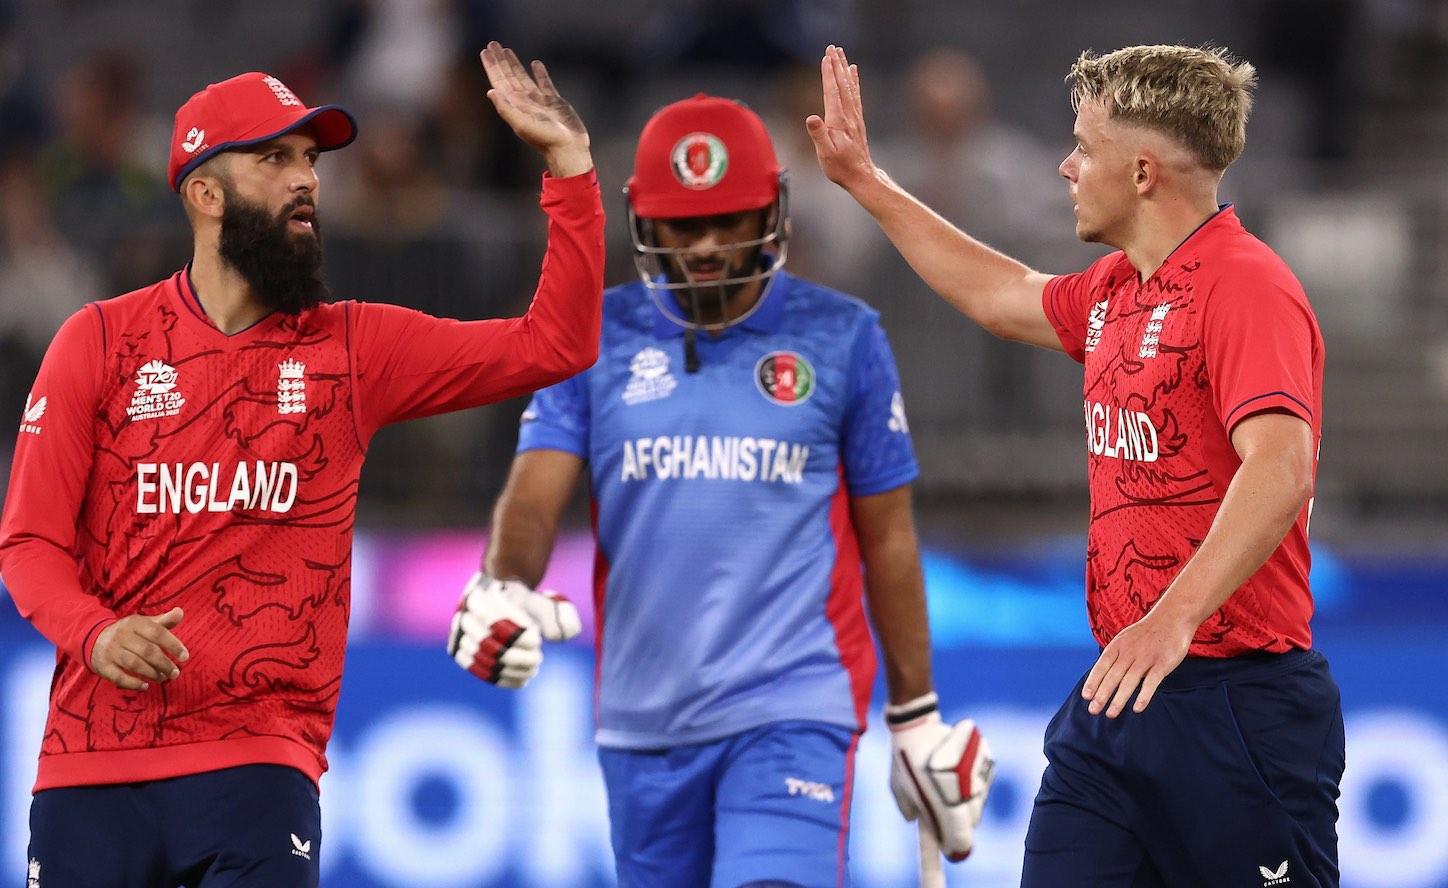 Highlights England vs Afghanistan (T20 World Cup)